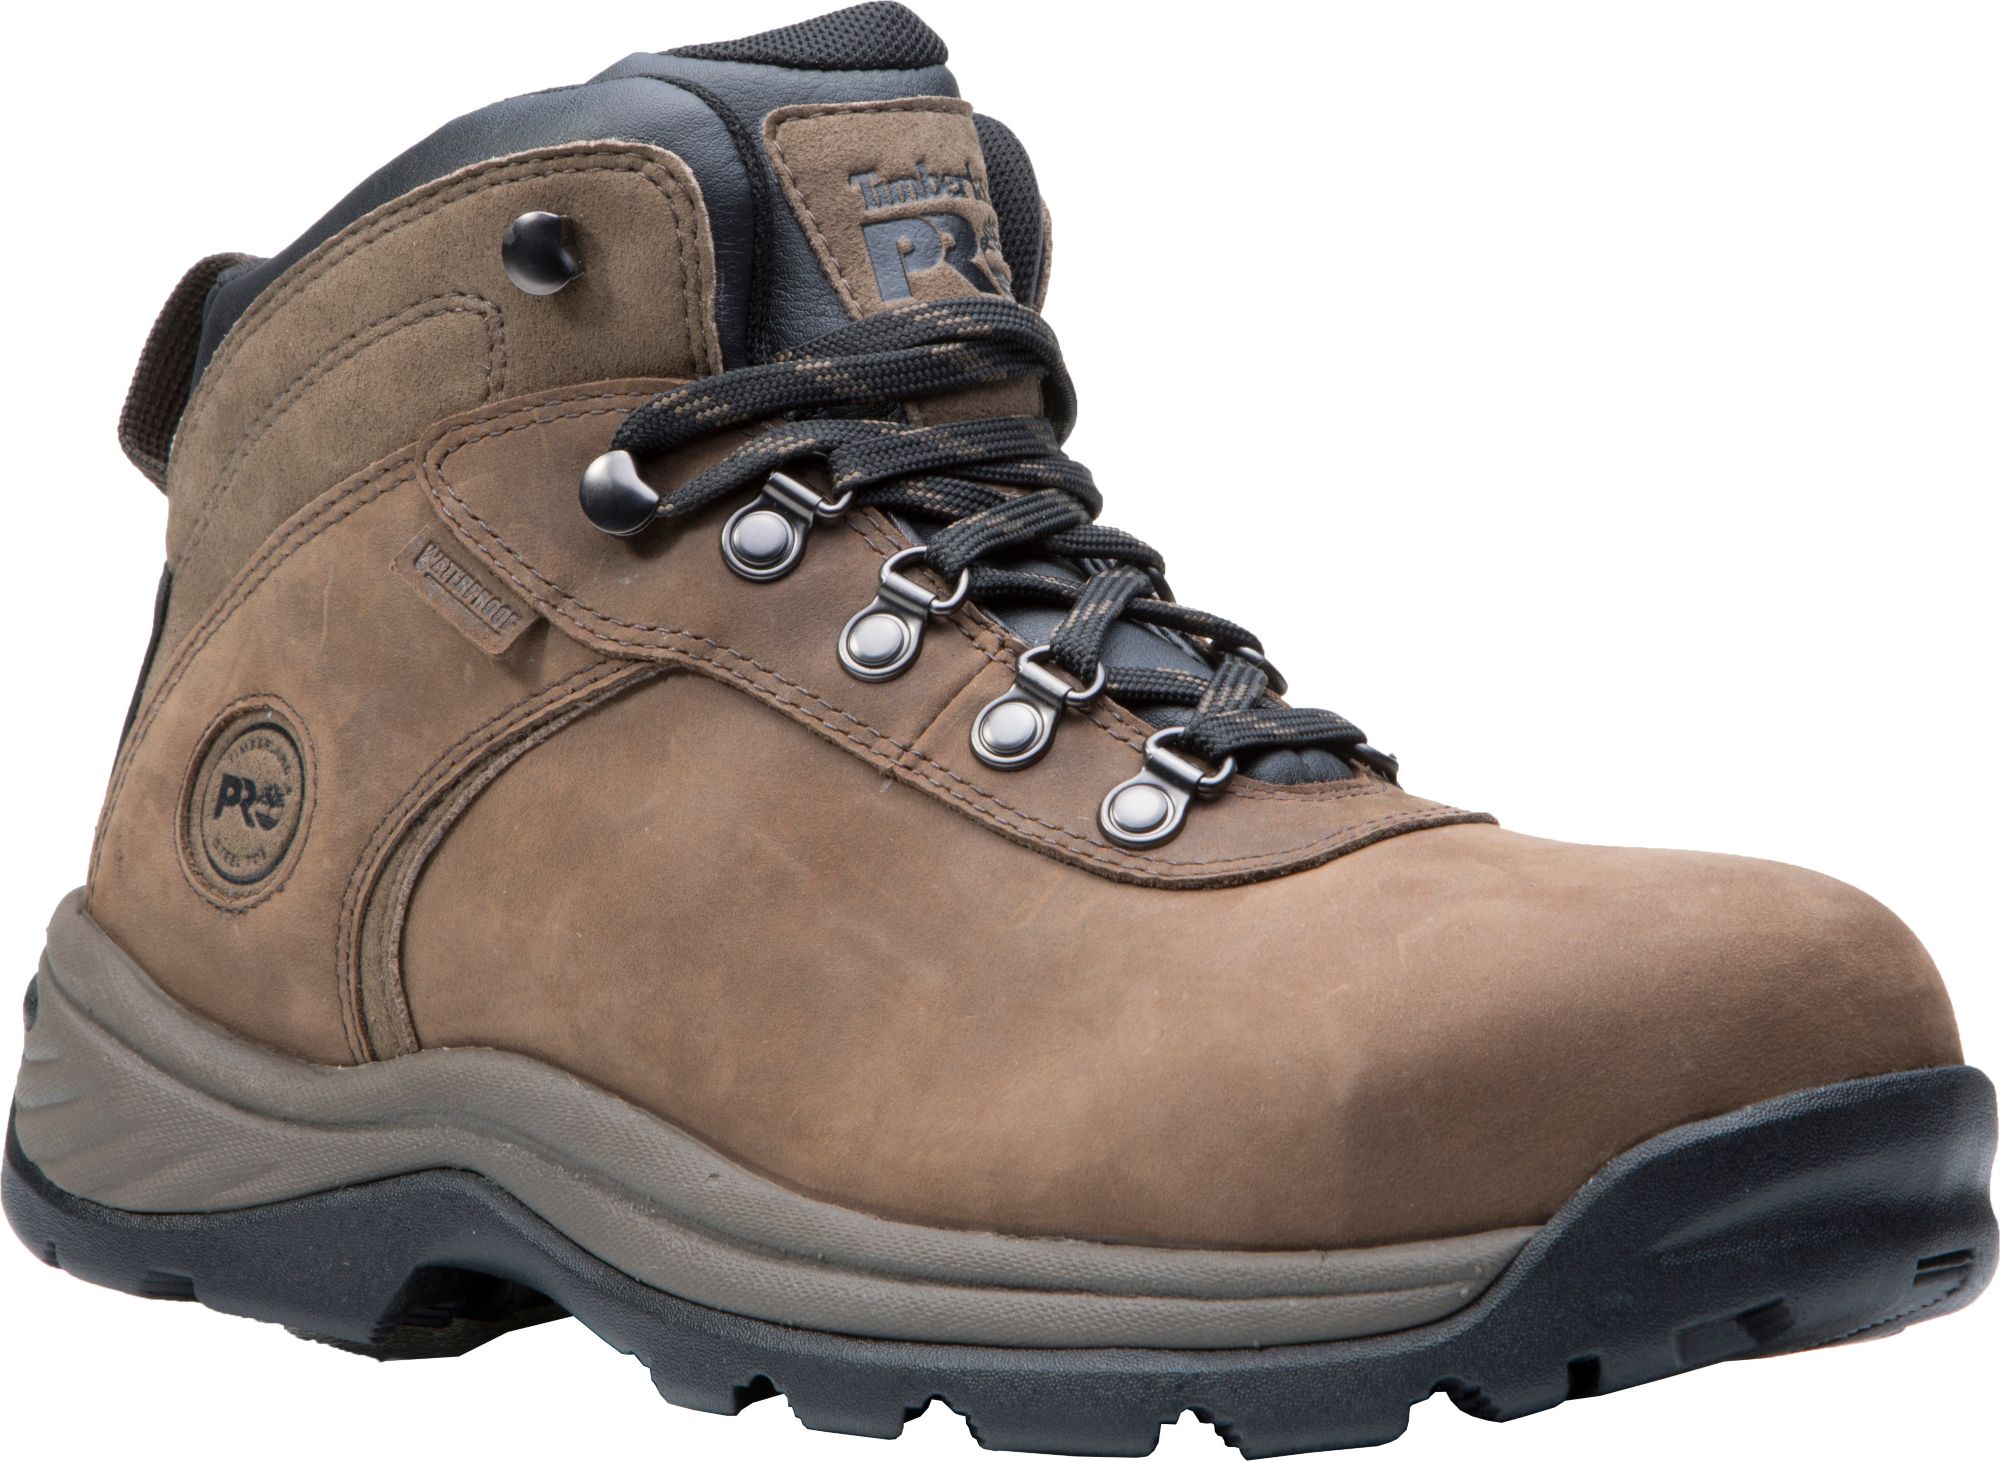 timberland pro driveforce men's work shoes